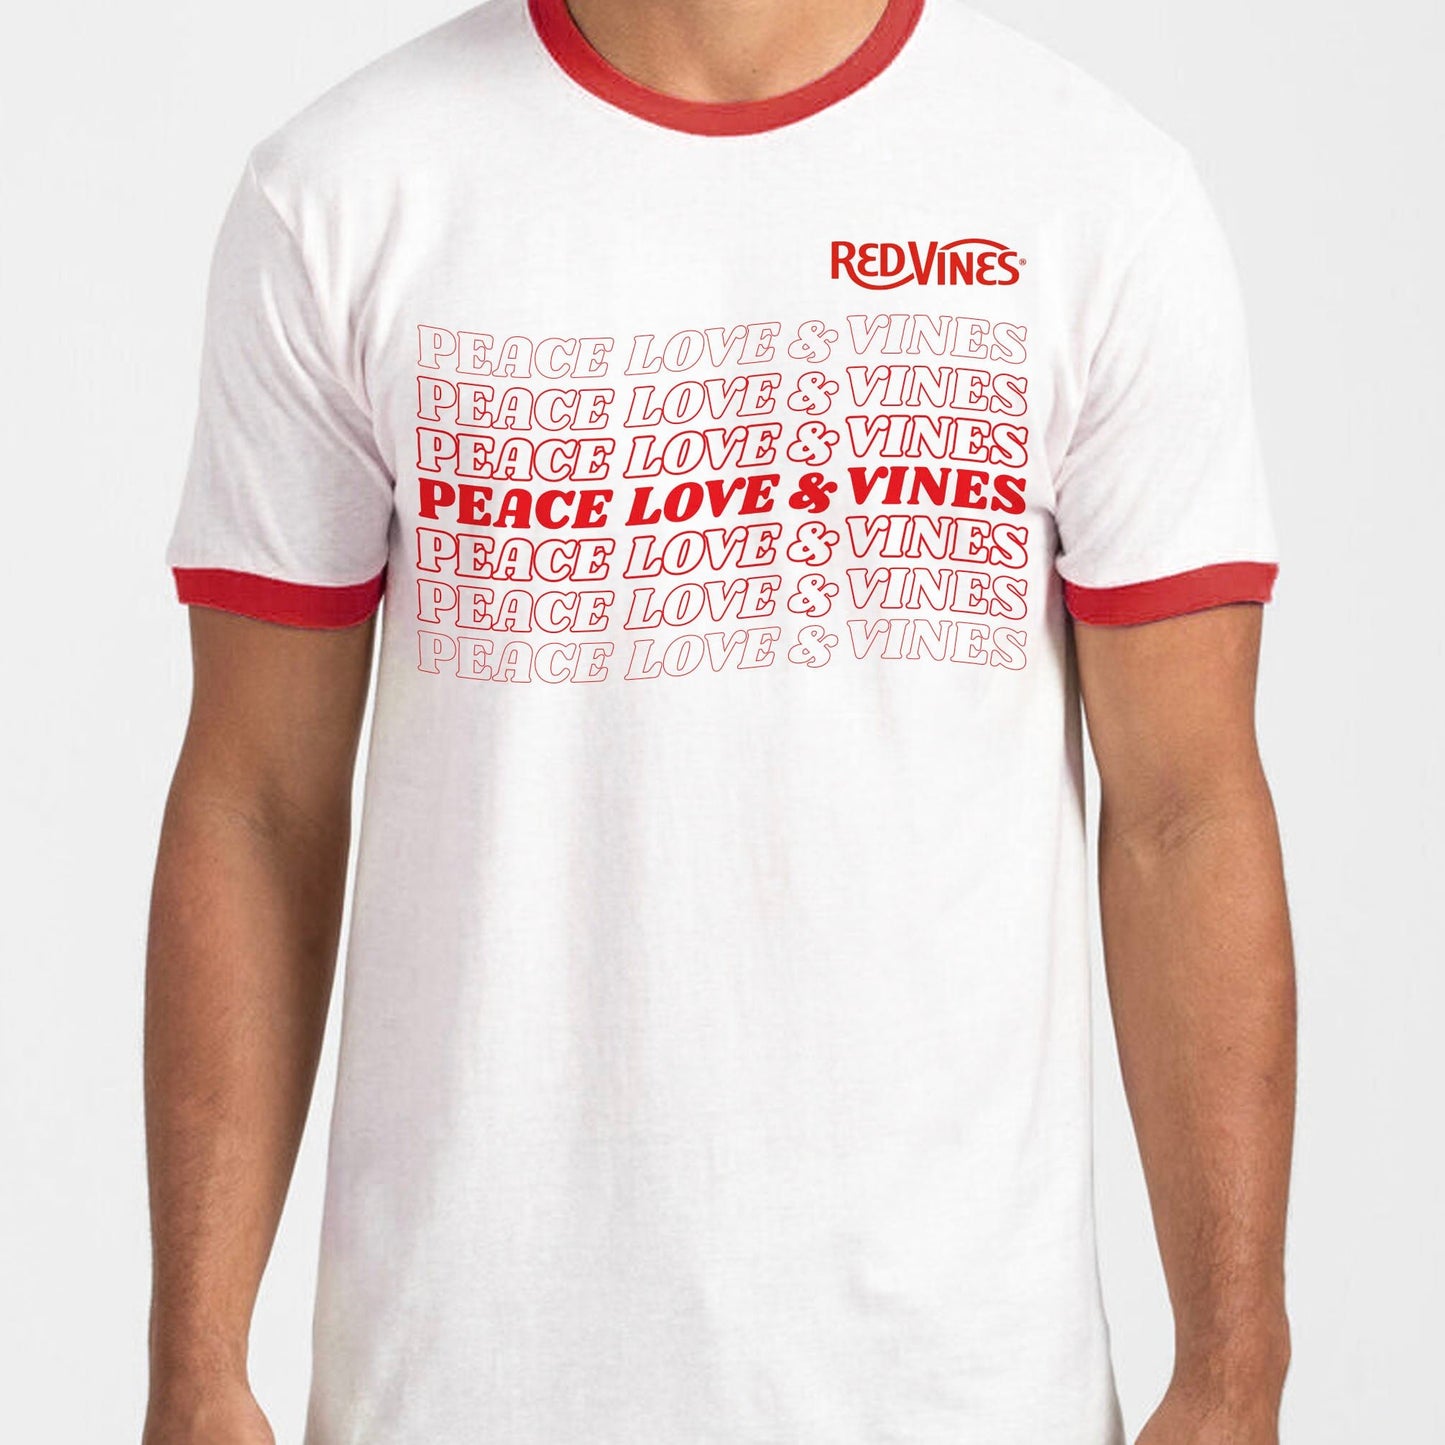 Udfør Forbedring Tutor RED VINES Red and White Peace, Love & Vines T-Shirt